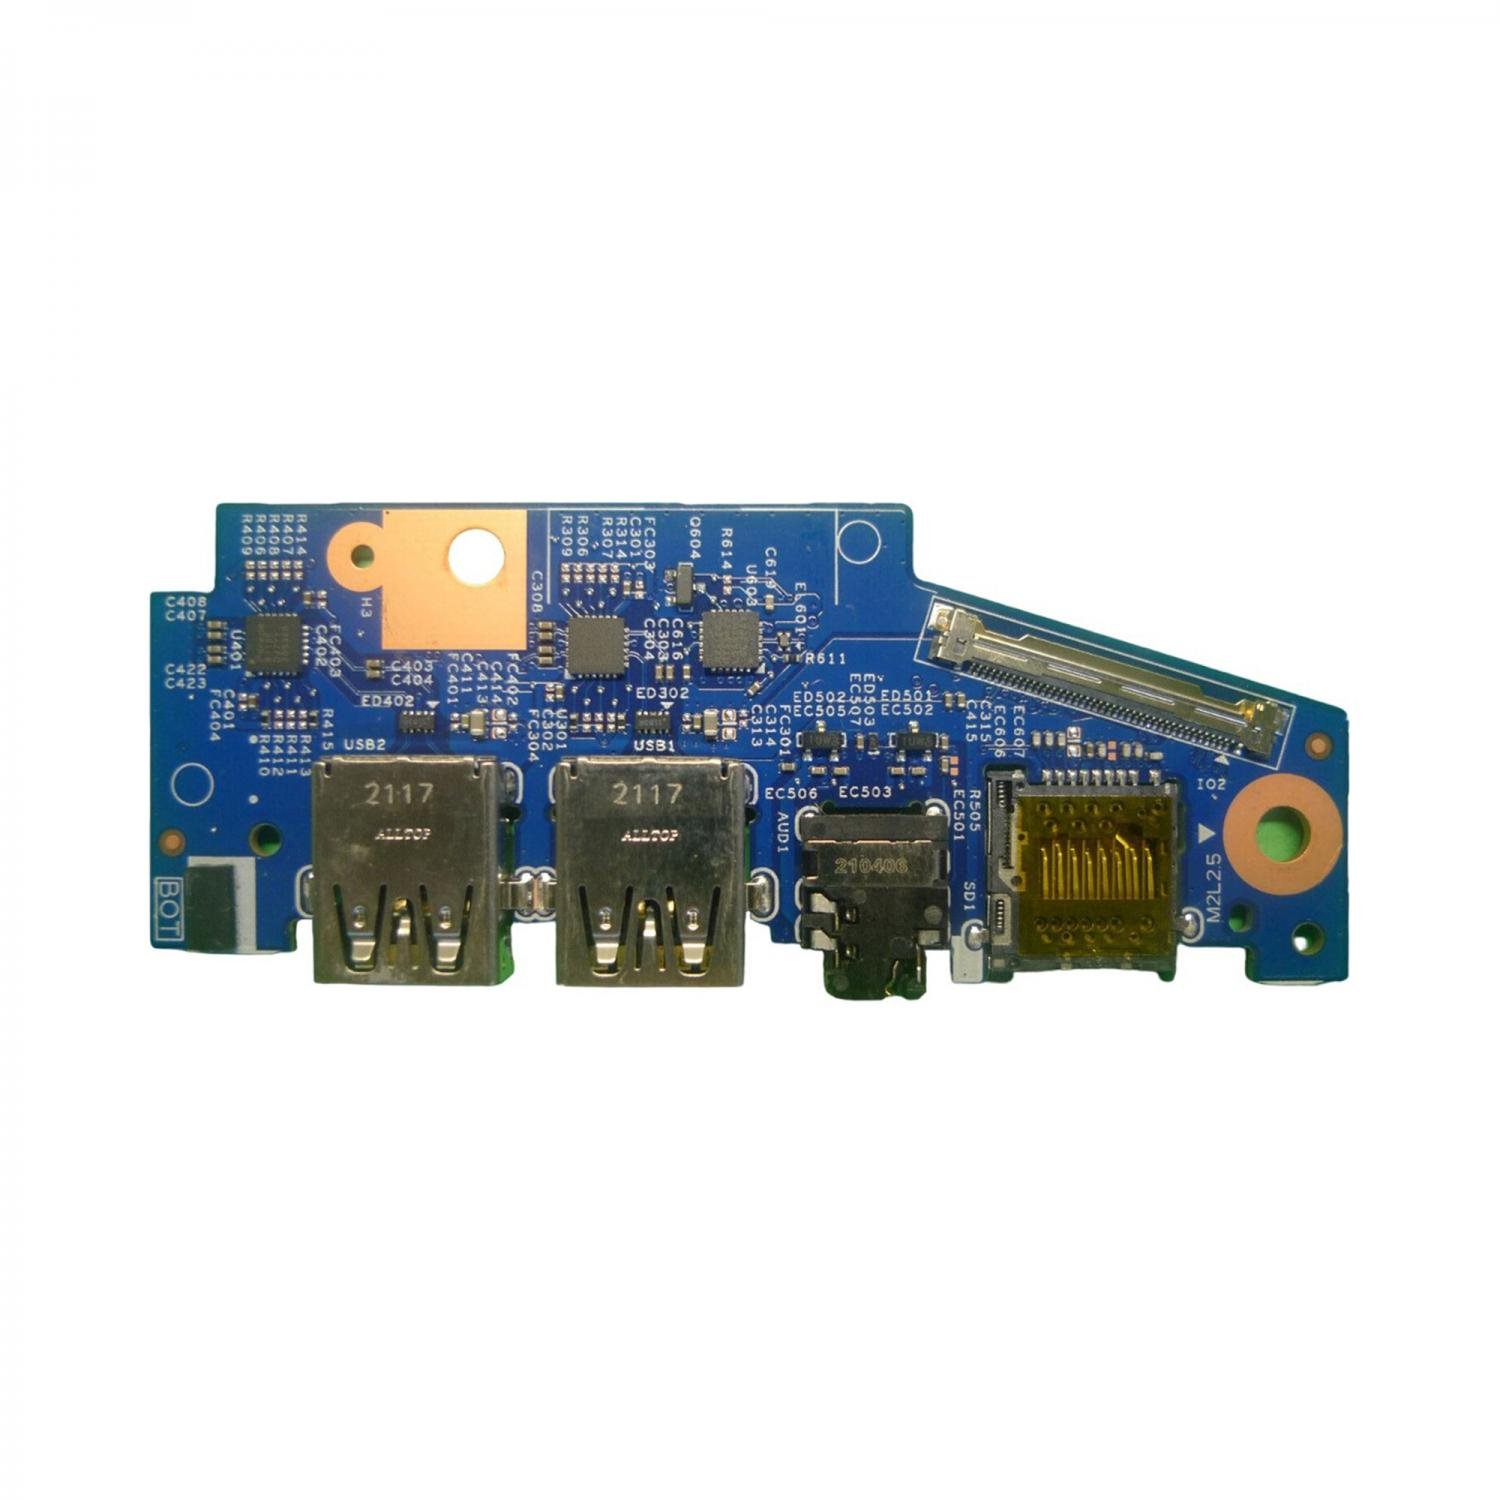 Dell Latitude 3320 OEM IO Daughter Circuit Board with USB / Power Button / Audio / SD Card Reader P/N 4550NB020001, CDR9Y 